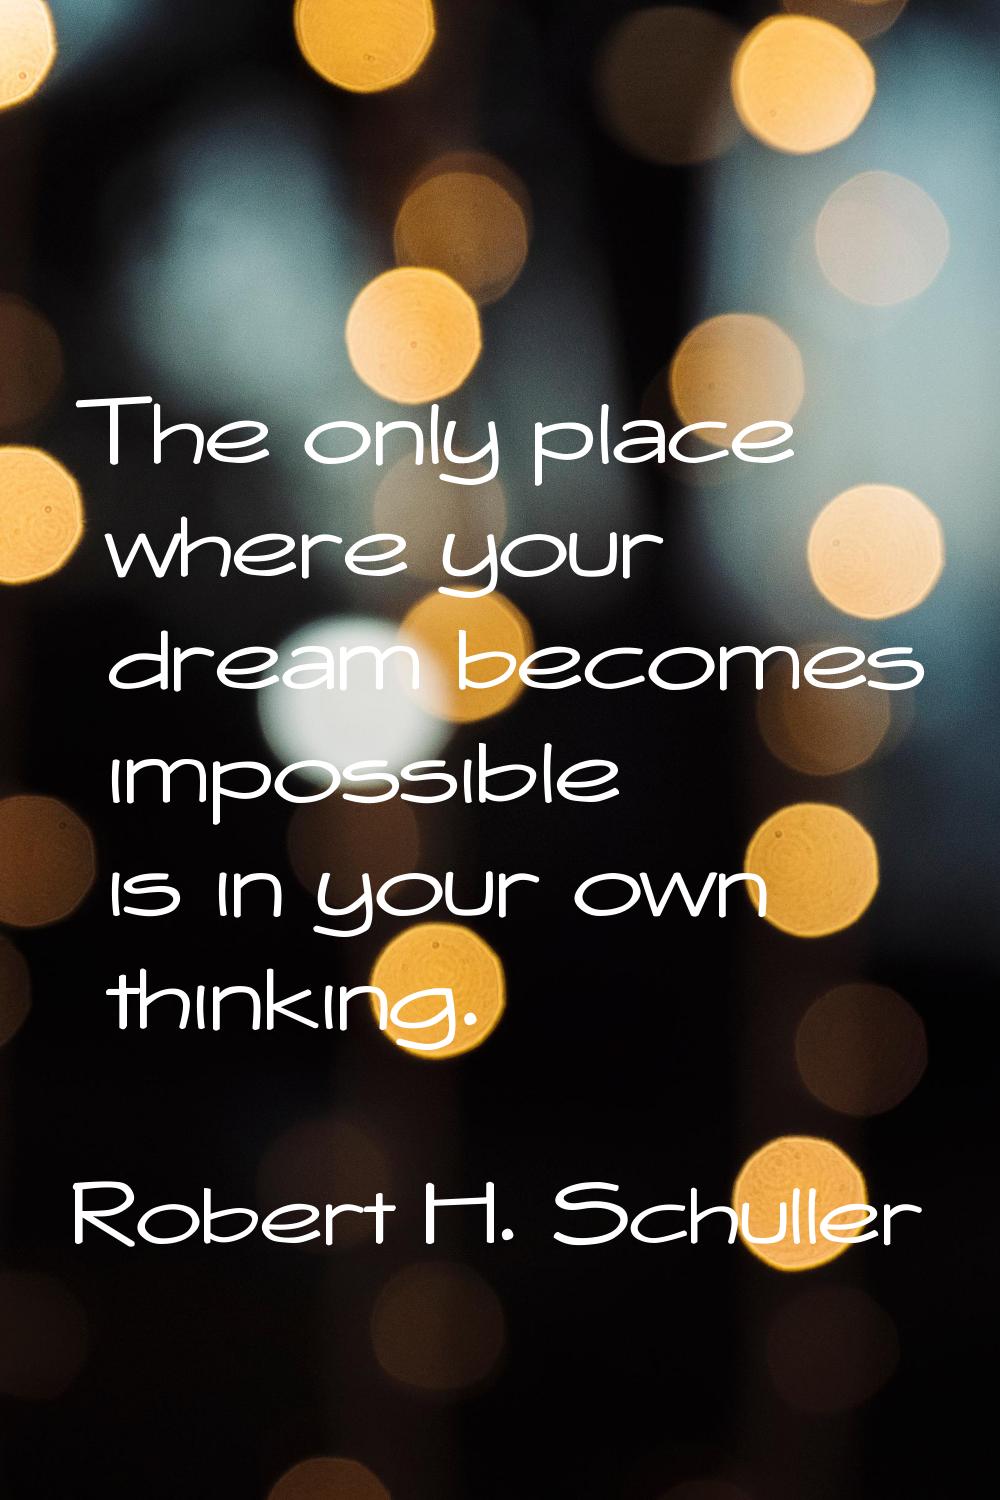 The only place where your dream becomes impossible is in your own thinking.